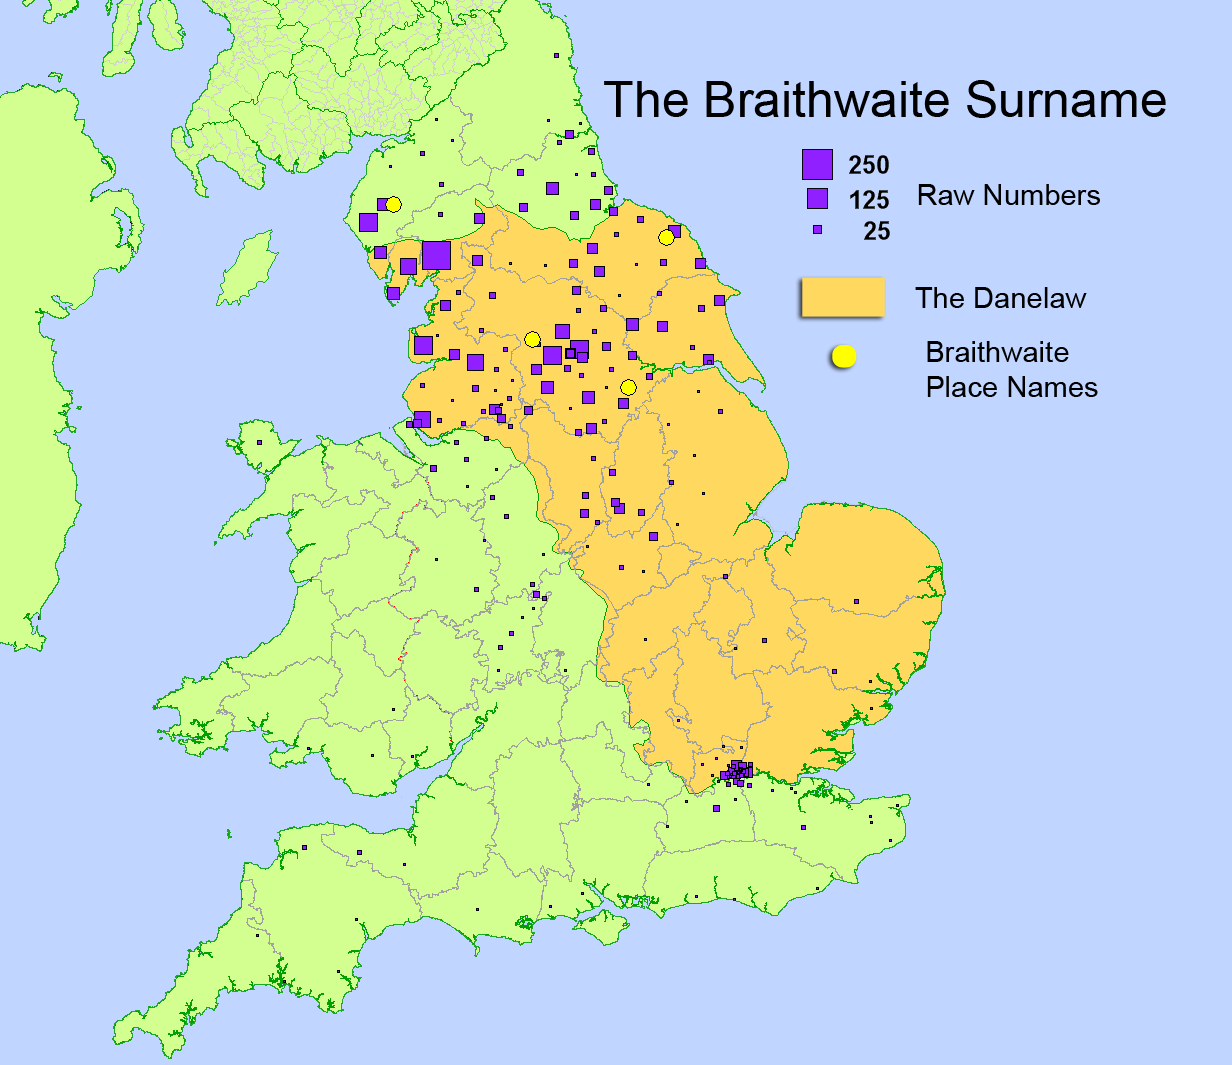 the braithwaite surname has its origins from a number of braithwaite small